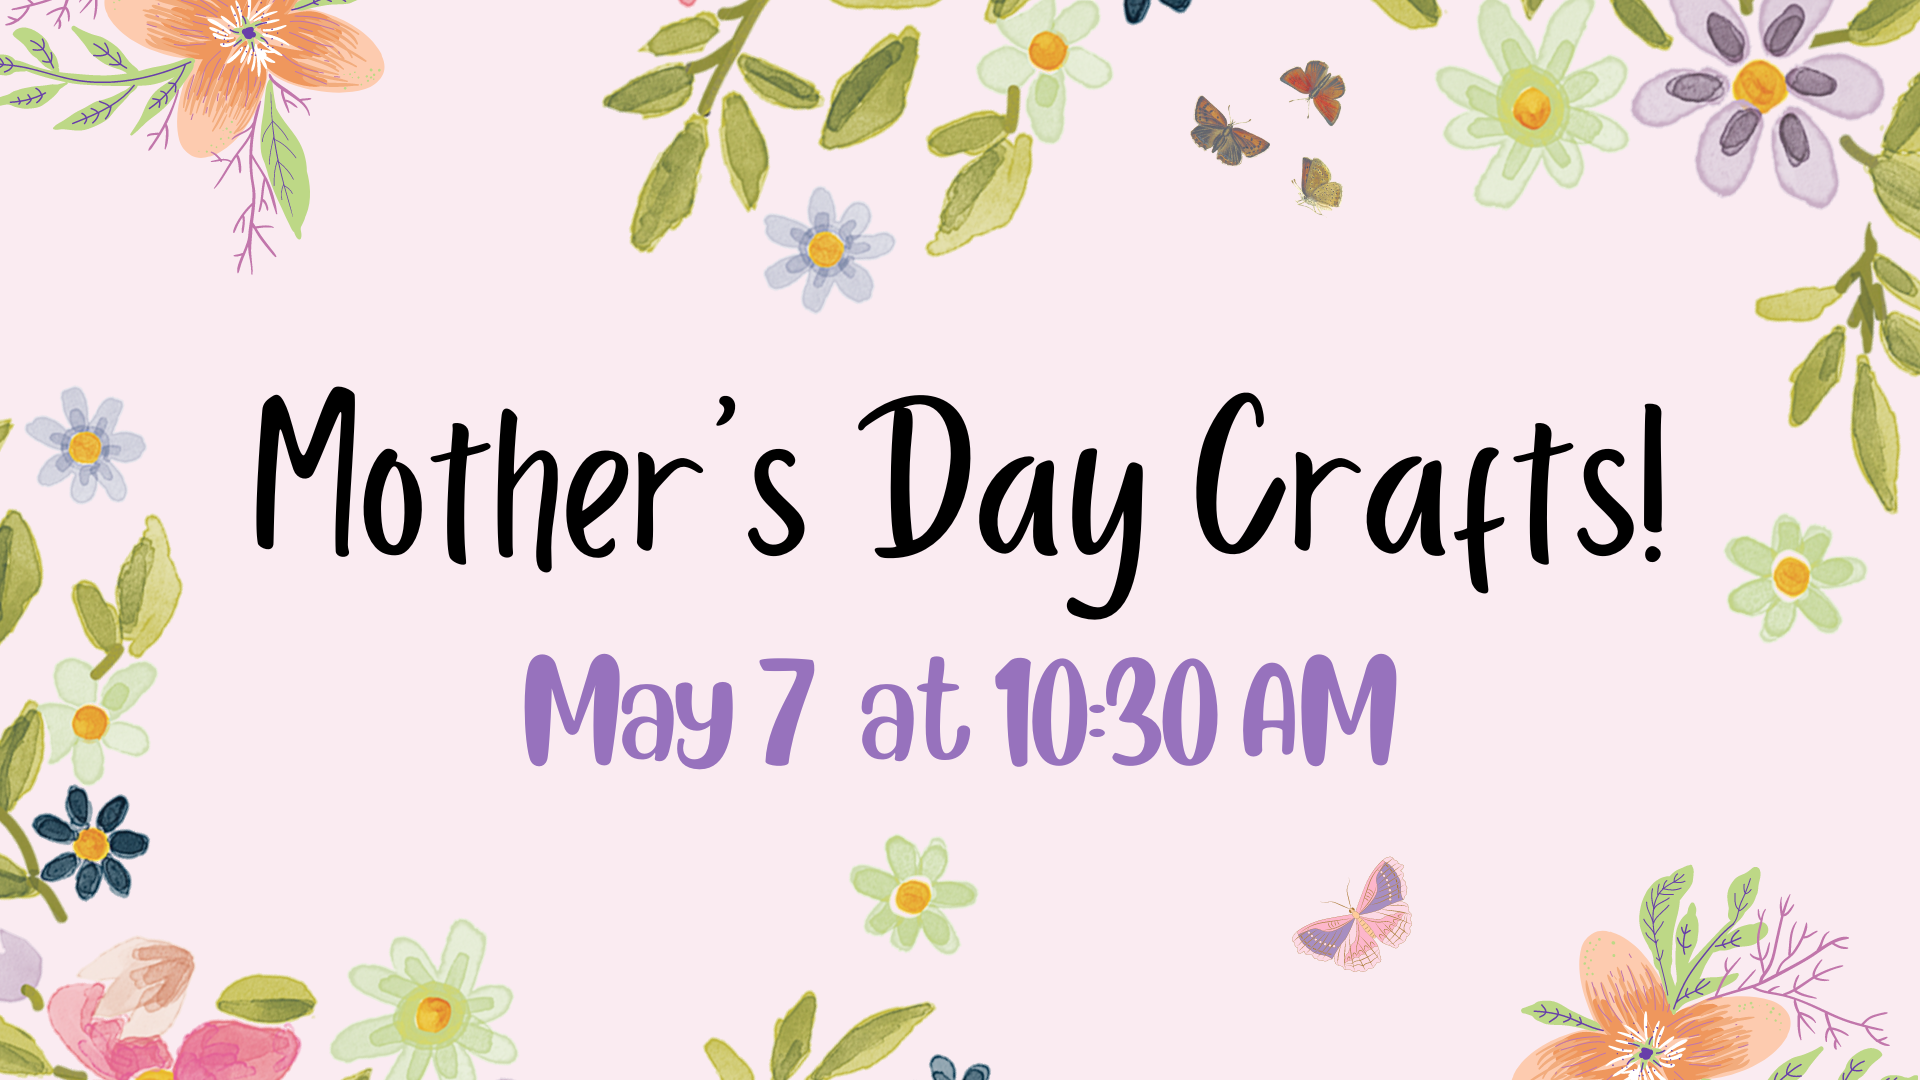 Mother's Day Crafts May 7 at 10:15 am